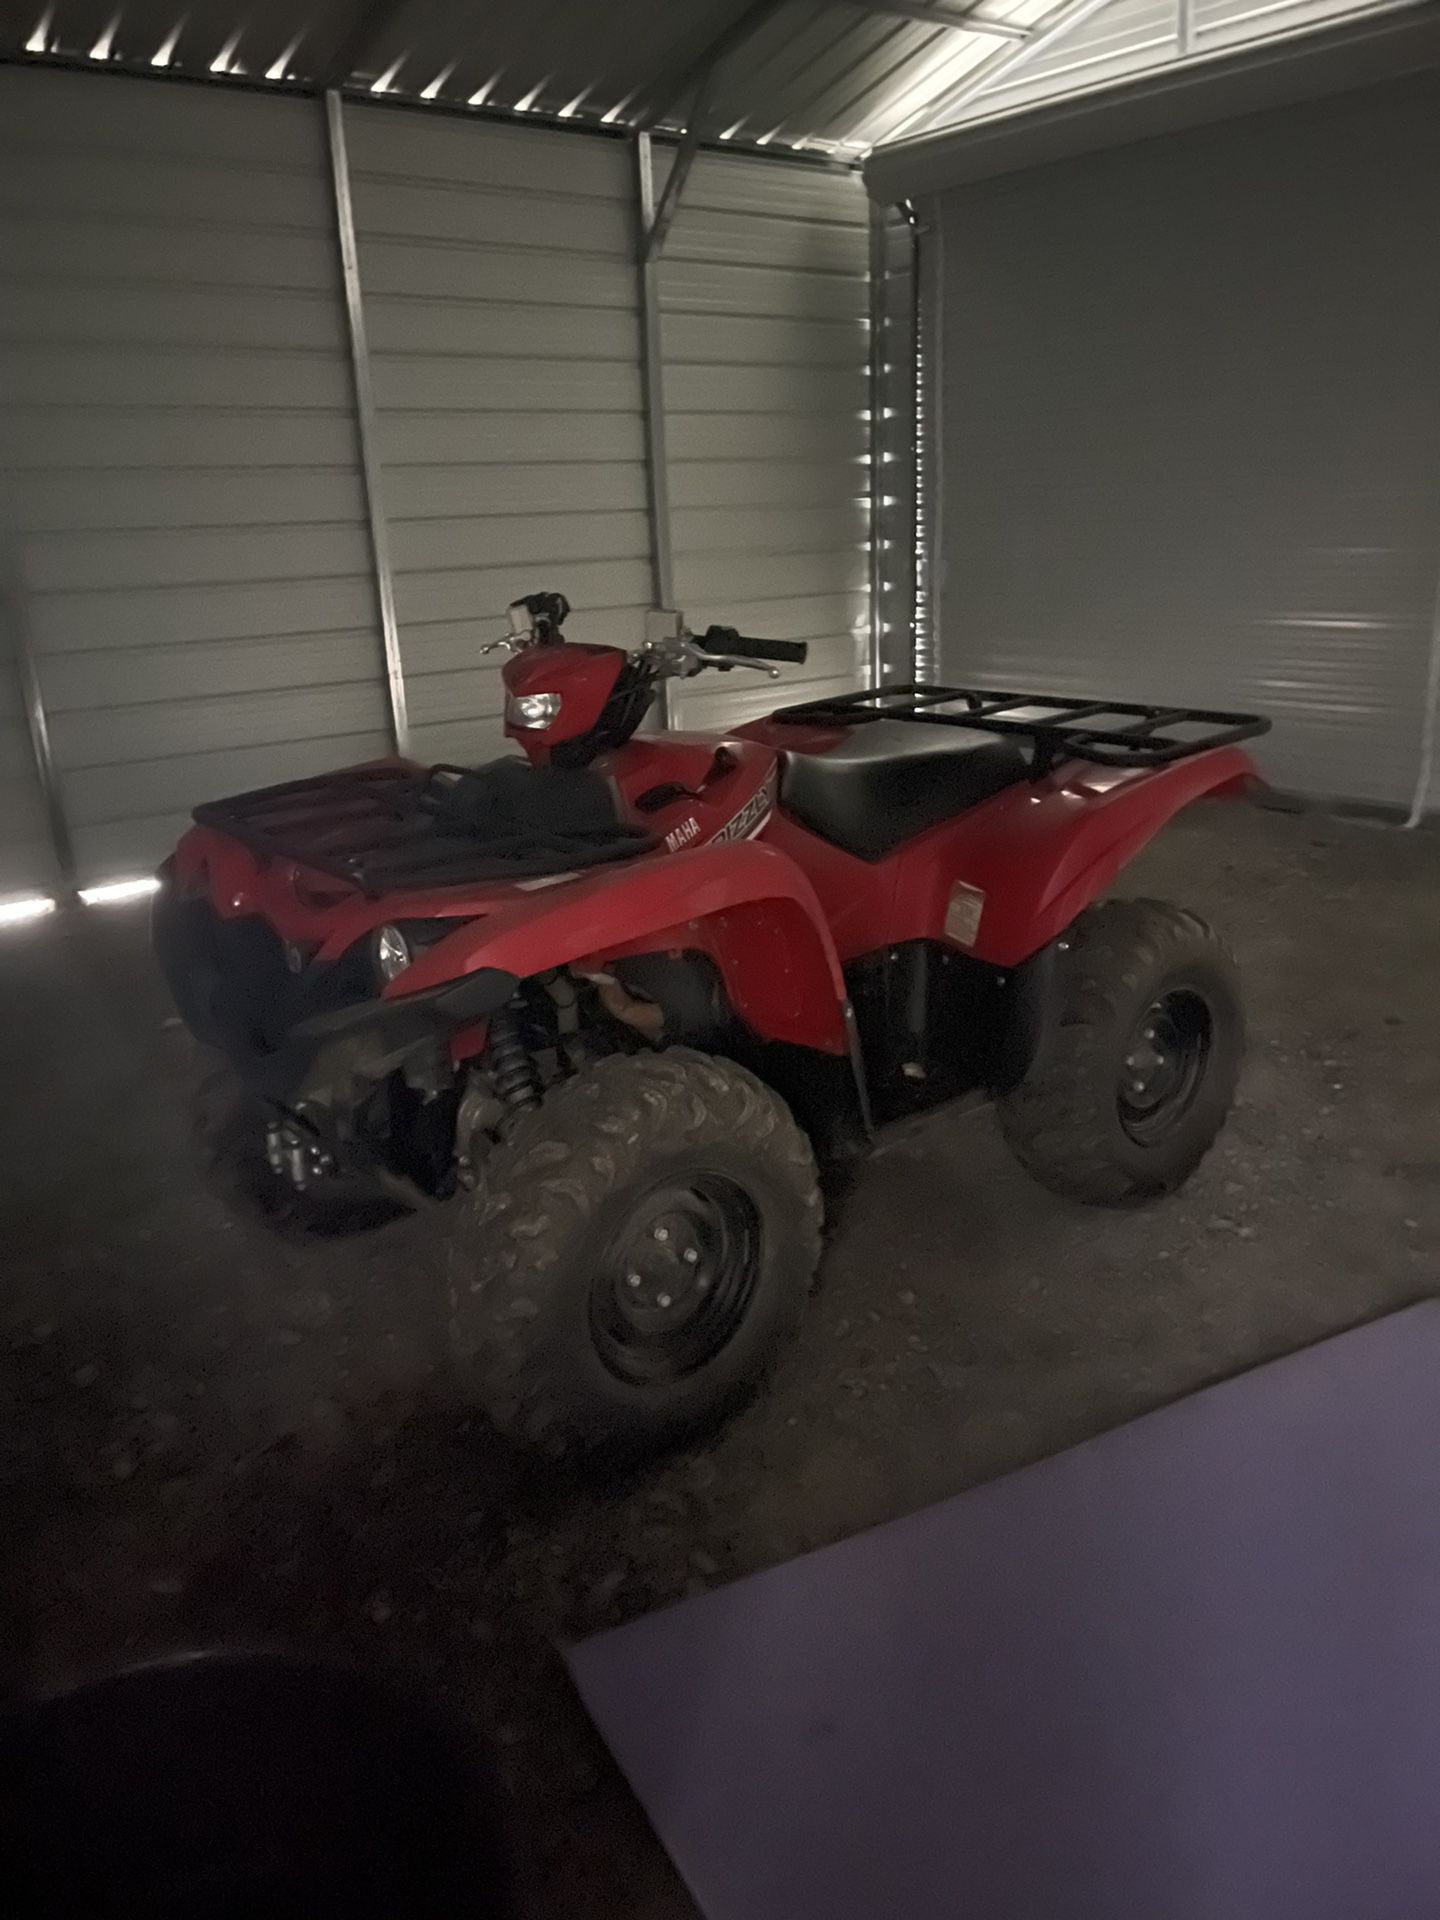 2016 Yamaha Grizzly 700 With Plow 